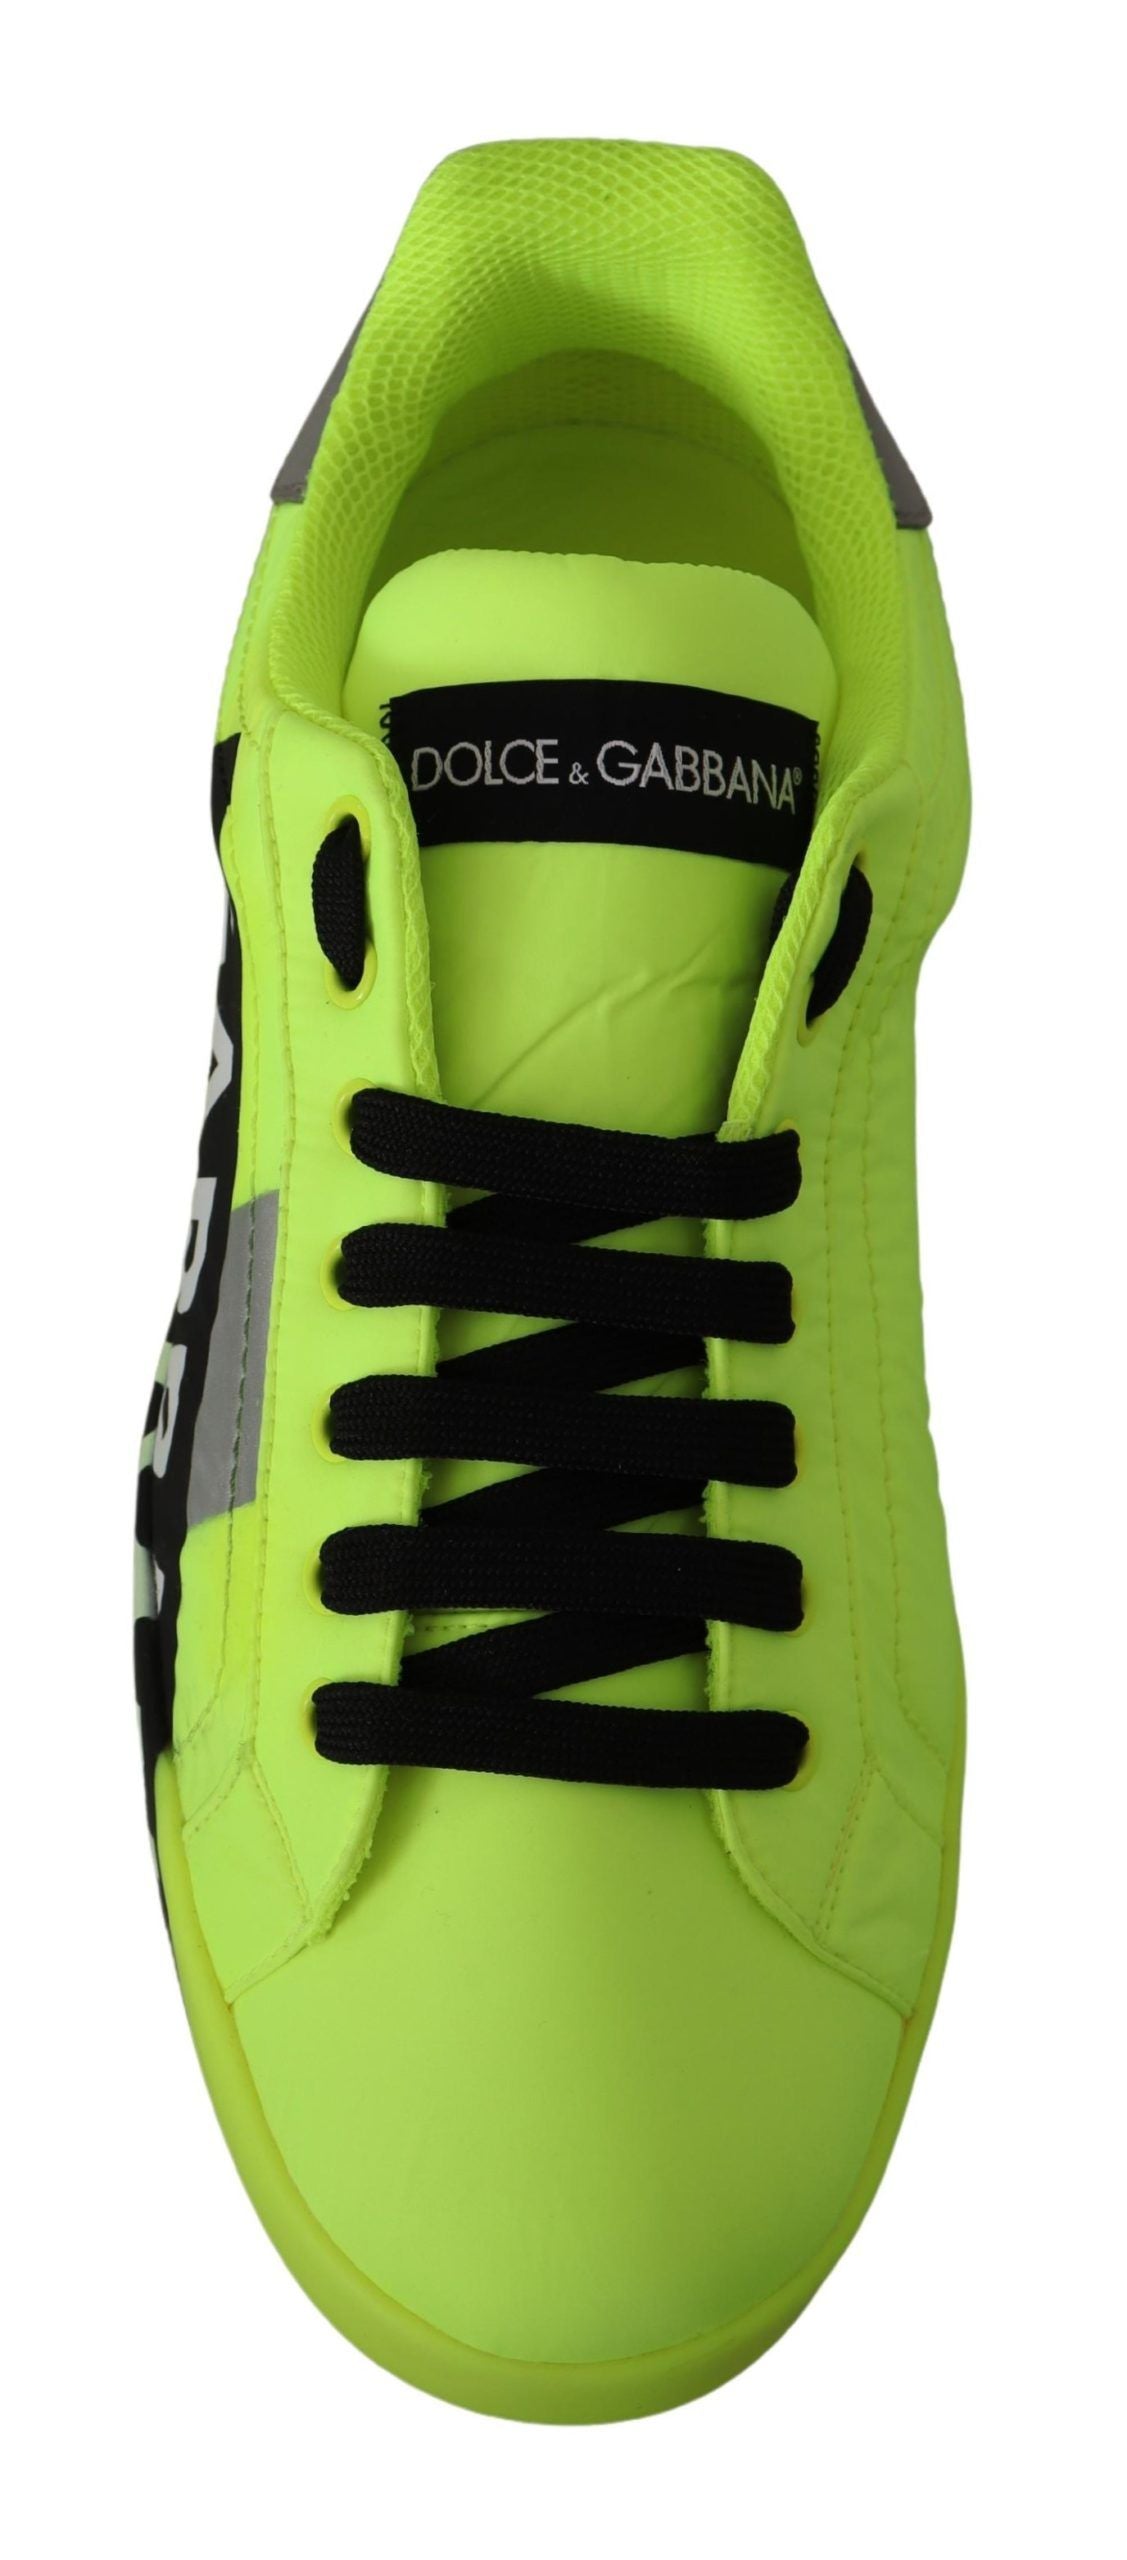 Neon Yellow Casual Sneakers with Black Logo Accents